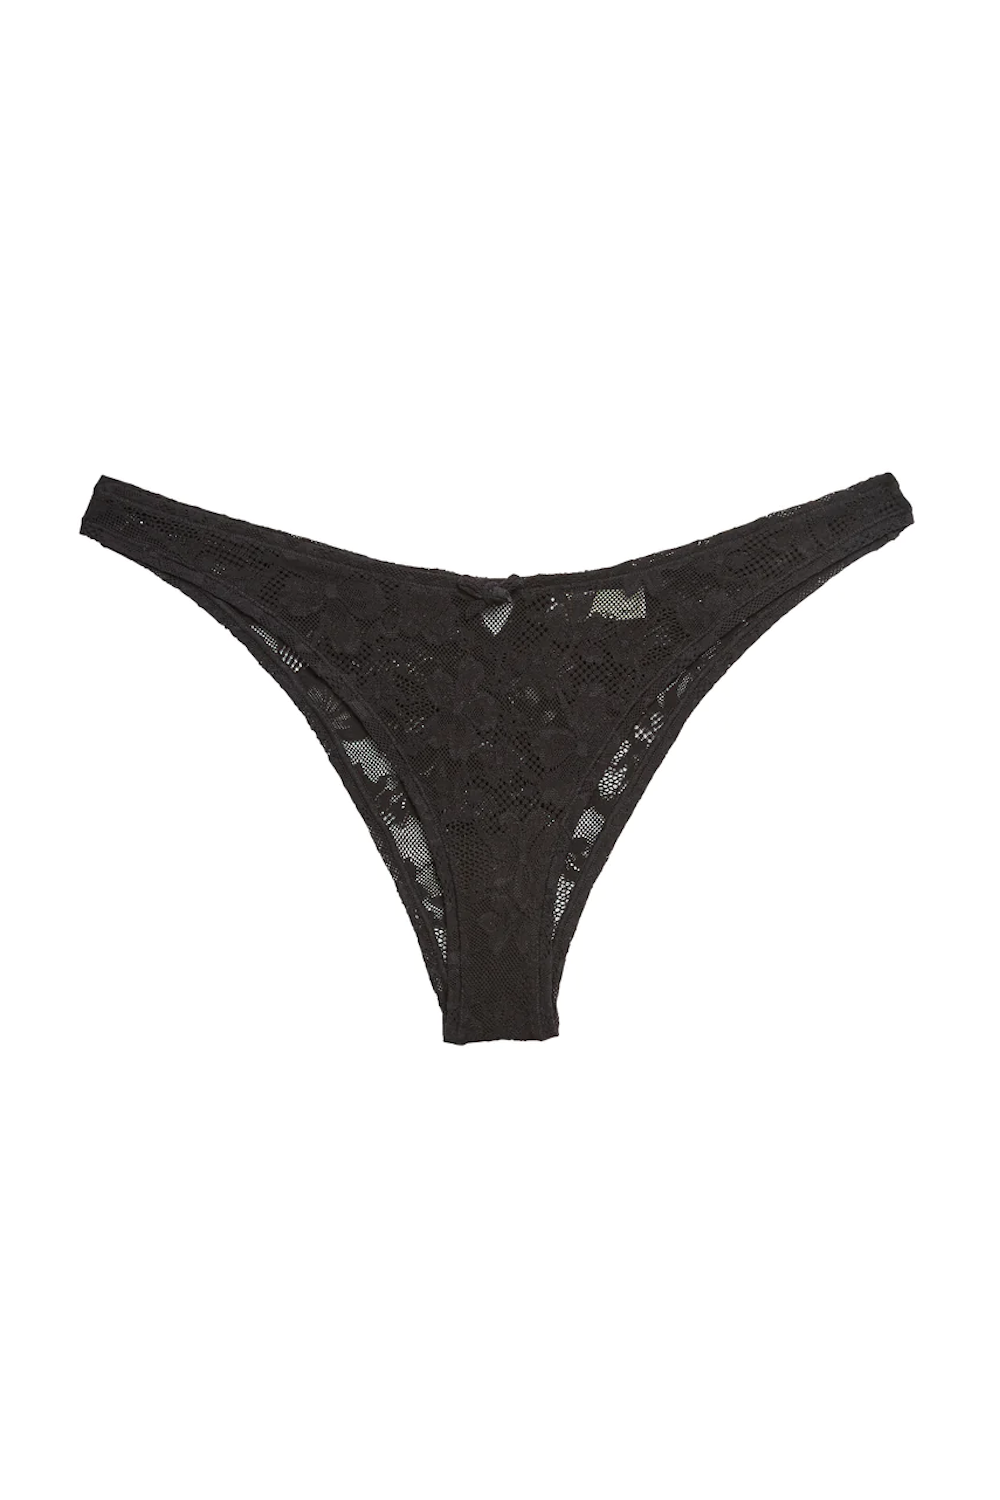 Le Stretch Multifit Lace Cheeky Black